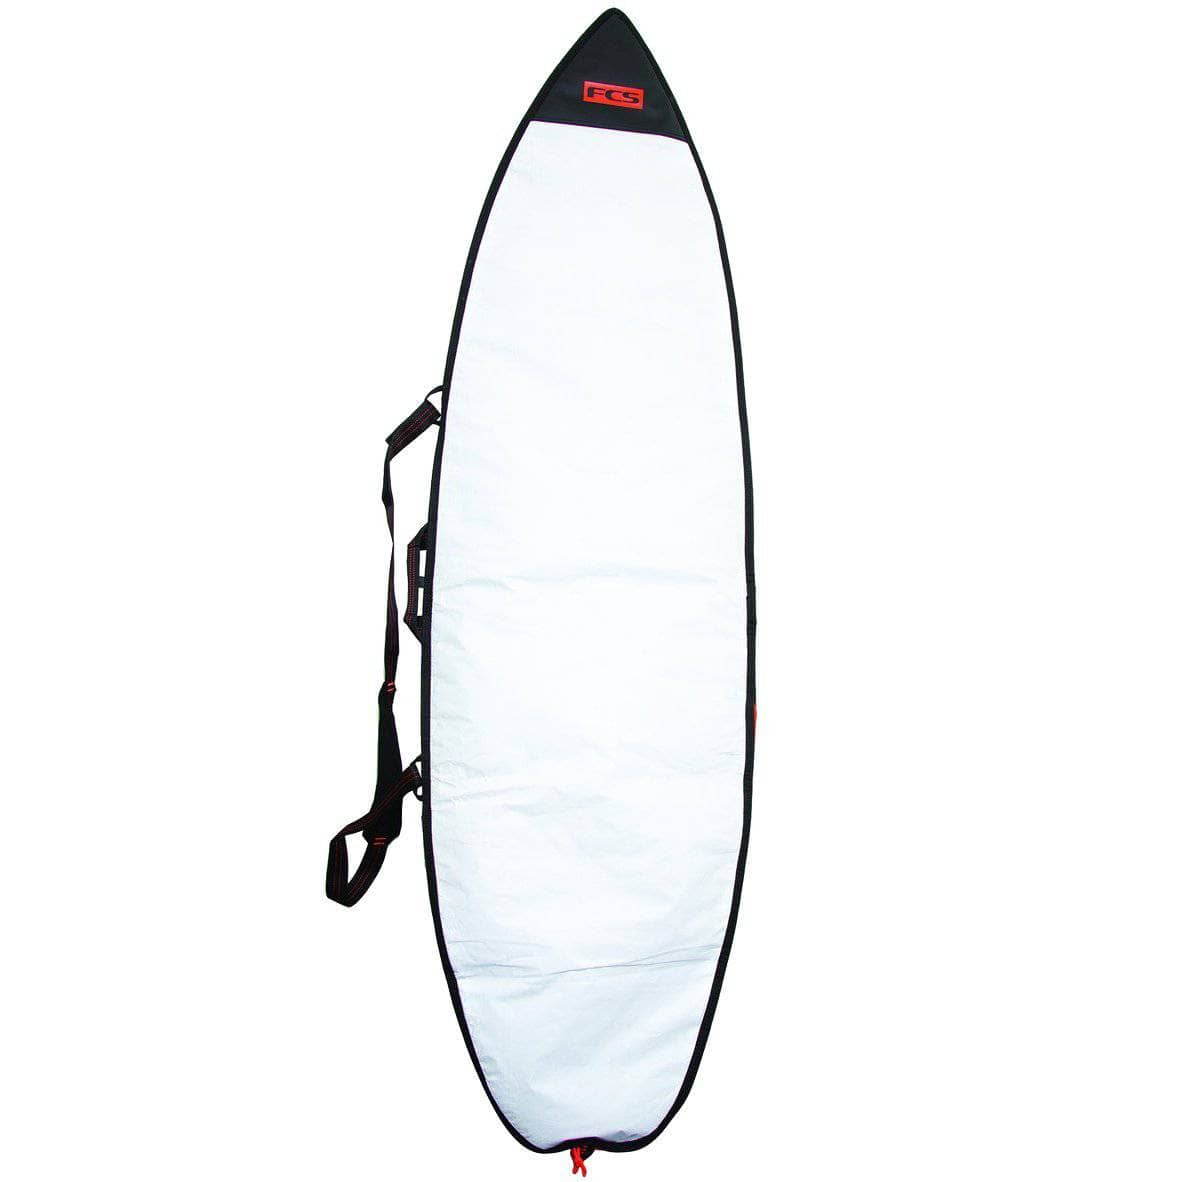 FCS 67 Classic All Purpose Surfboard Cover Bag - Steel Blue/White Surfboard Day Runner Bag/Cover by FCS 6ft 7in